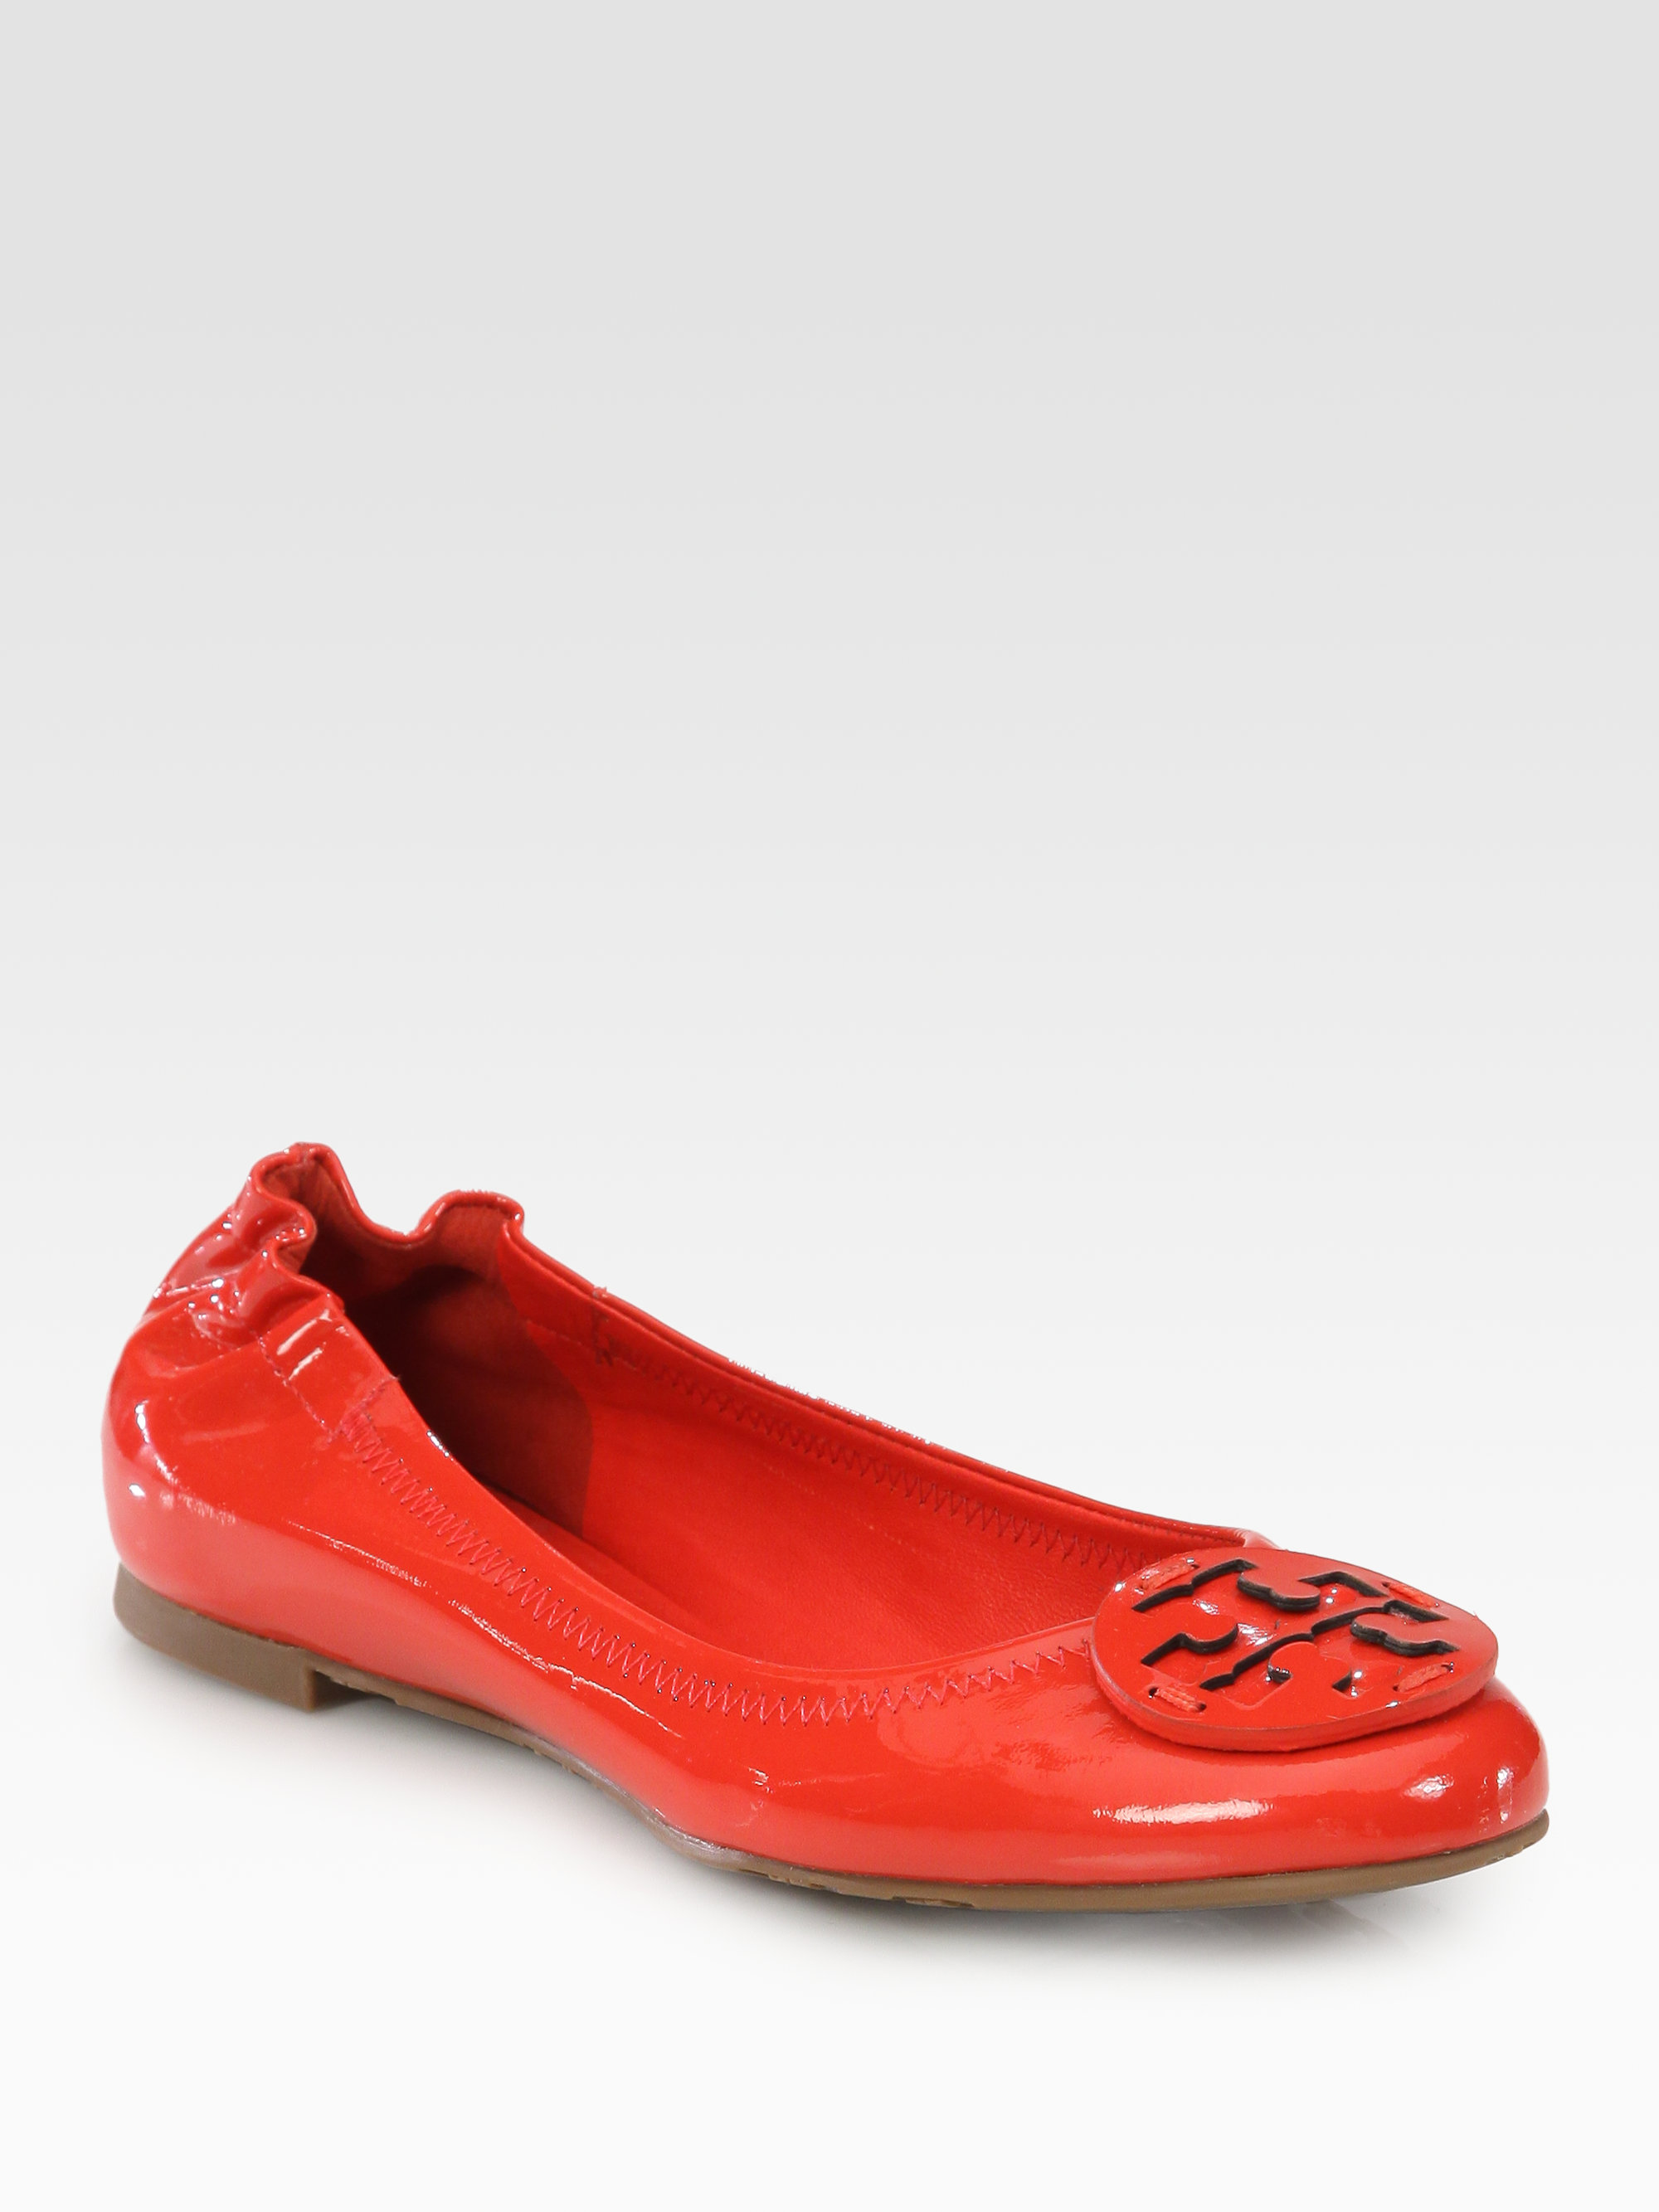 Tory Burch Reva Patent Leather Logo Ballet Flats in Red | Lyst